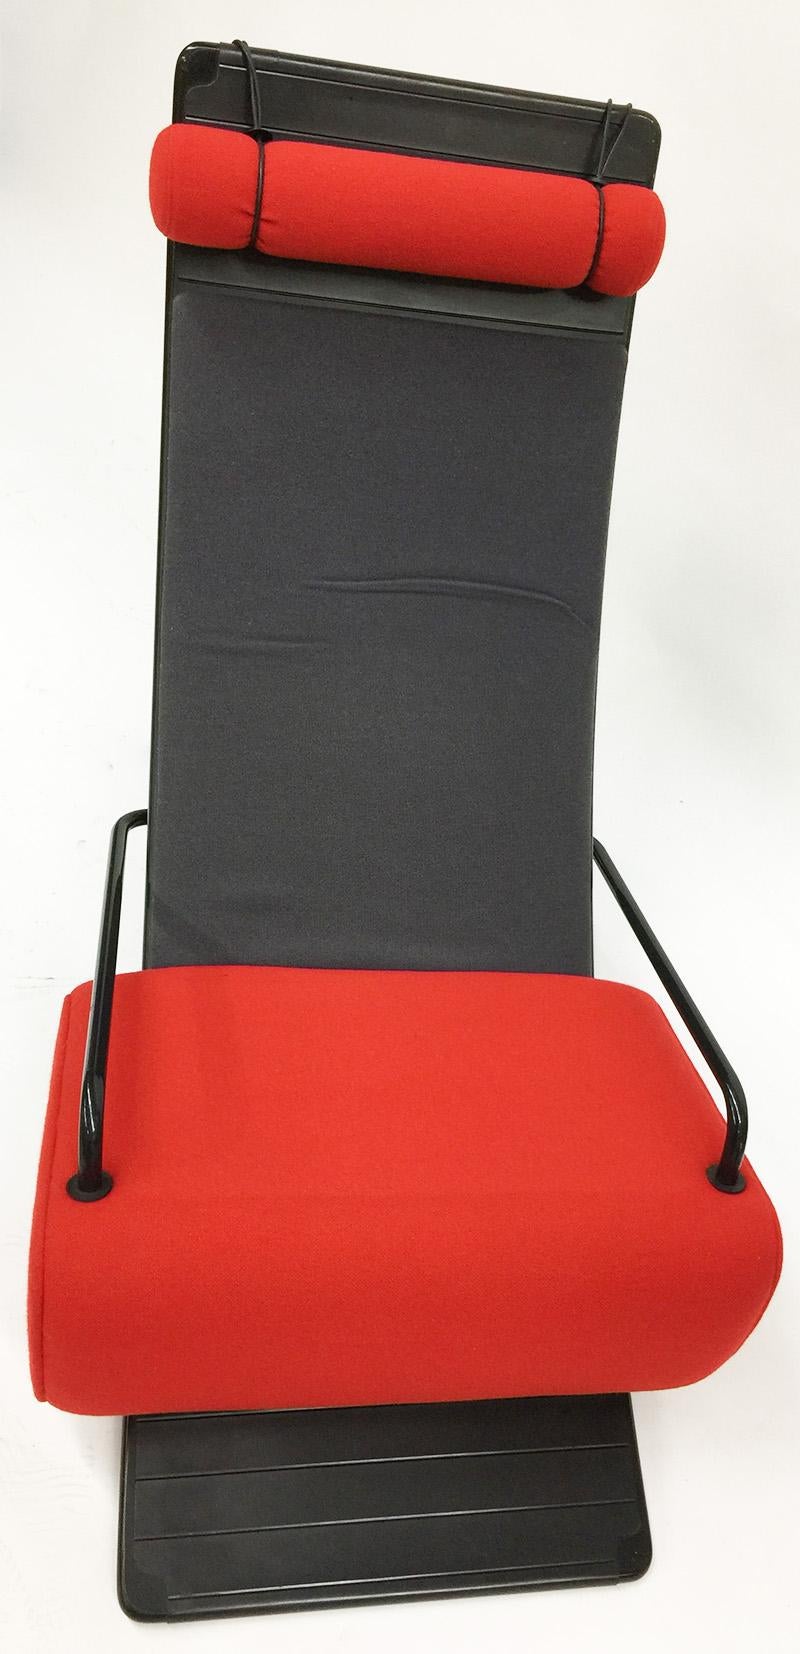 20th Century Early Model 045 Mobiles Design Chair for Artifort by Marcel Wanders, 1963 For Sale